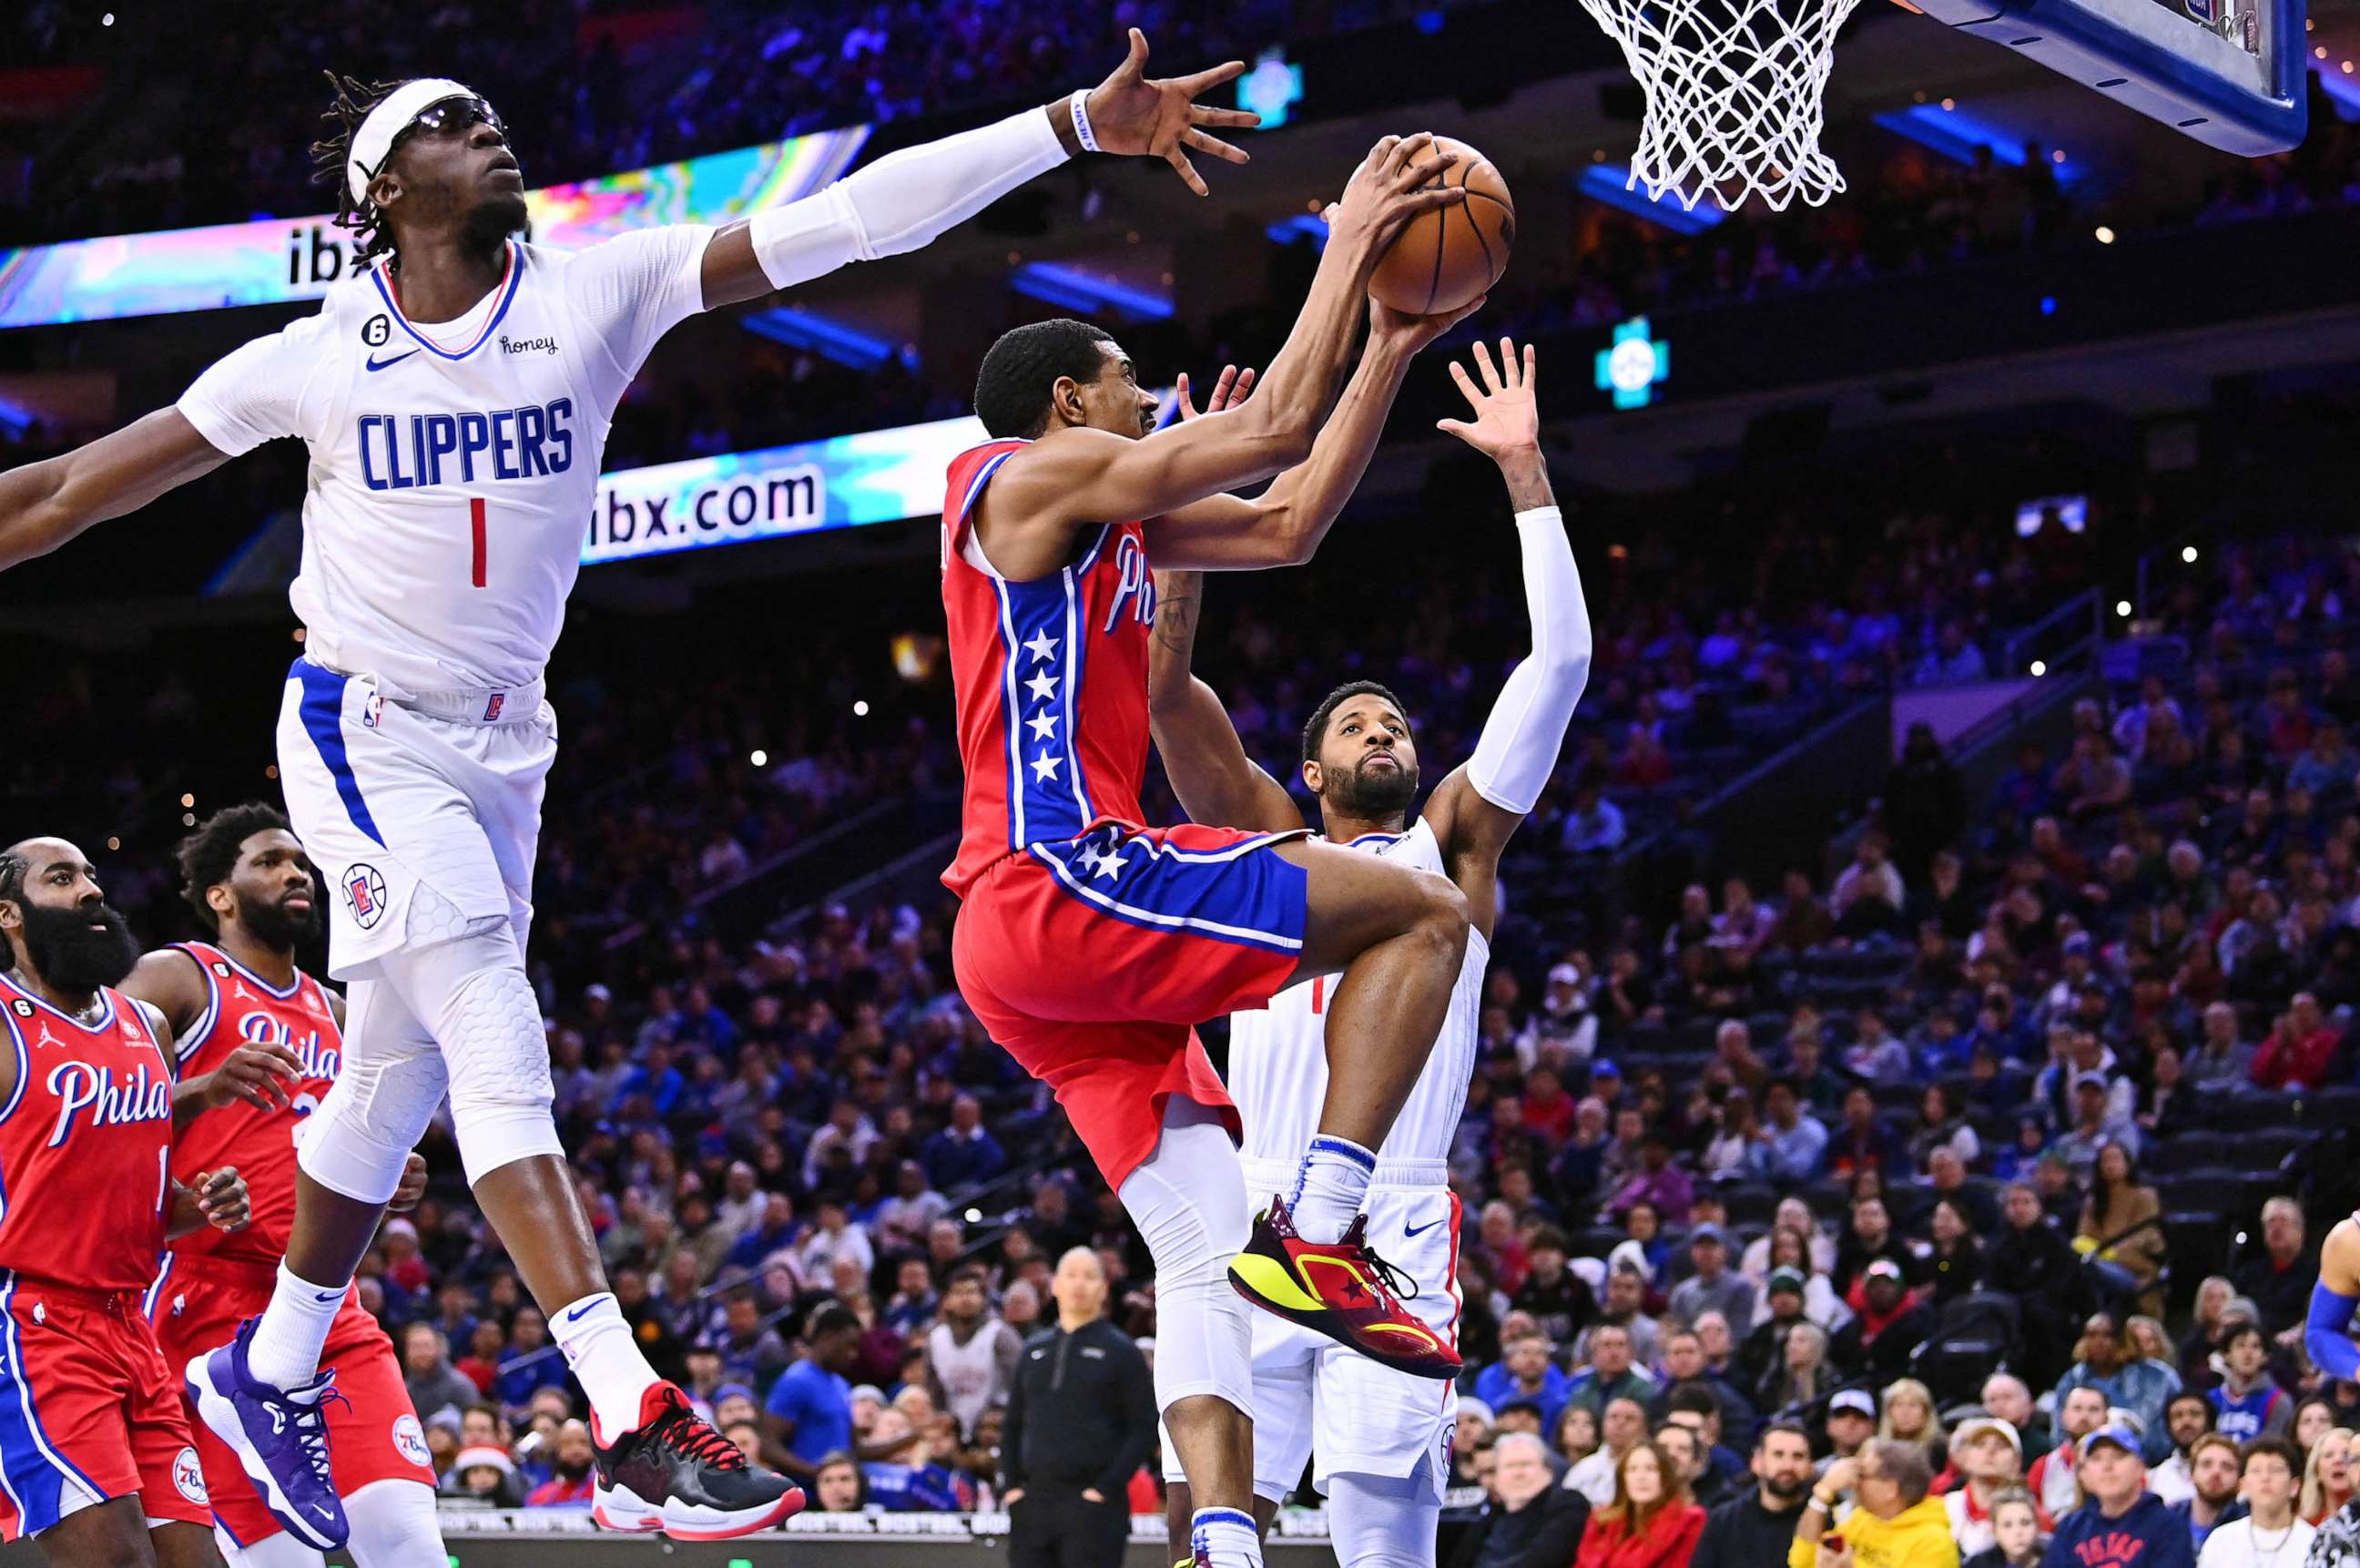 PHOTO: Philadelphia 76ers guard De'Anthony Melton (8) shoots against Los Angeles Clippers guard Reggie Jackson (1) and forward Paul George (13) in the first quarter at Wells Fargo Center.